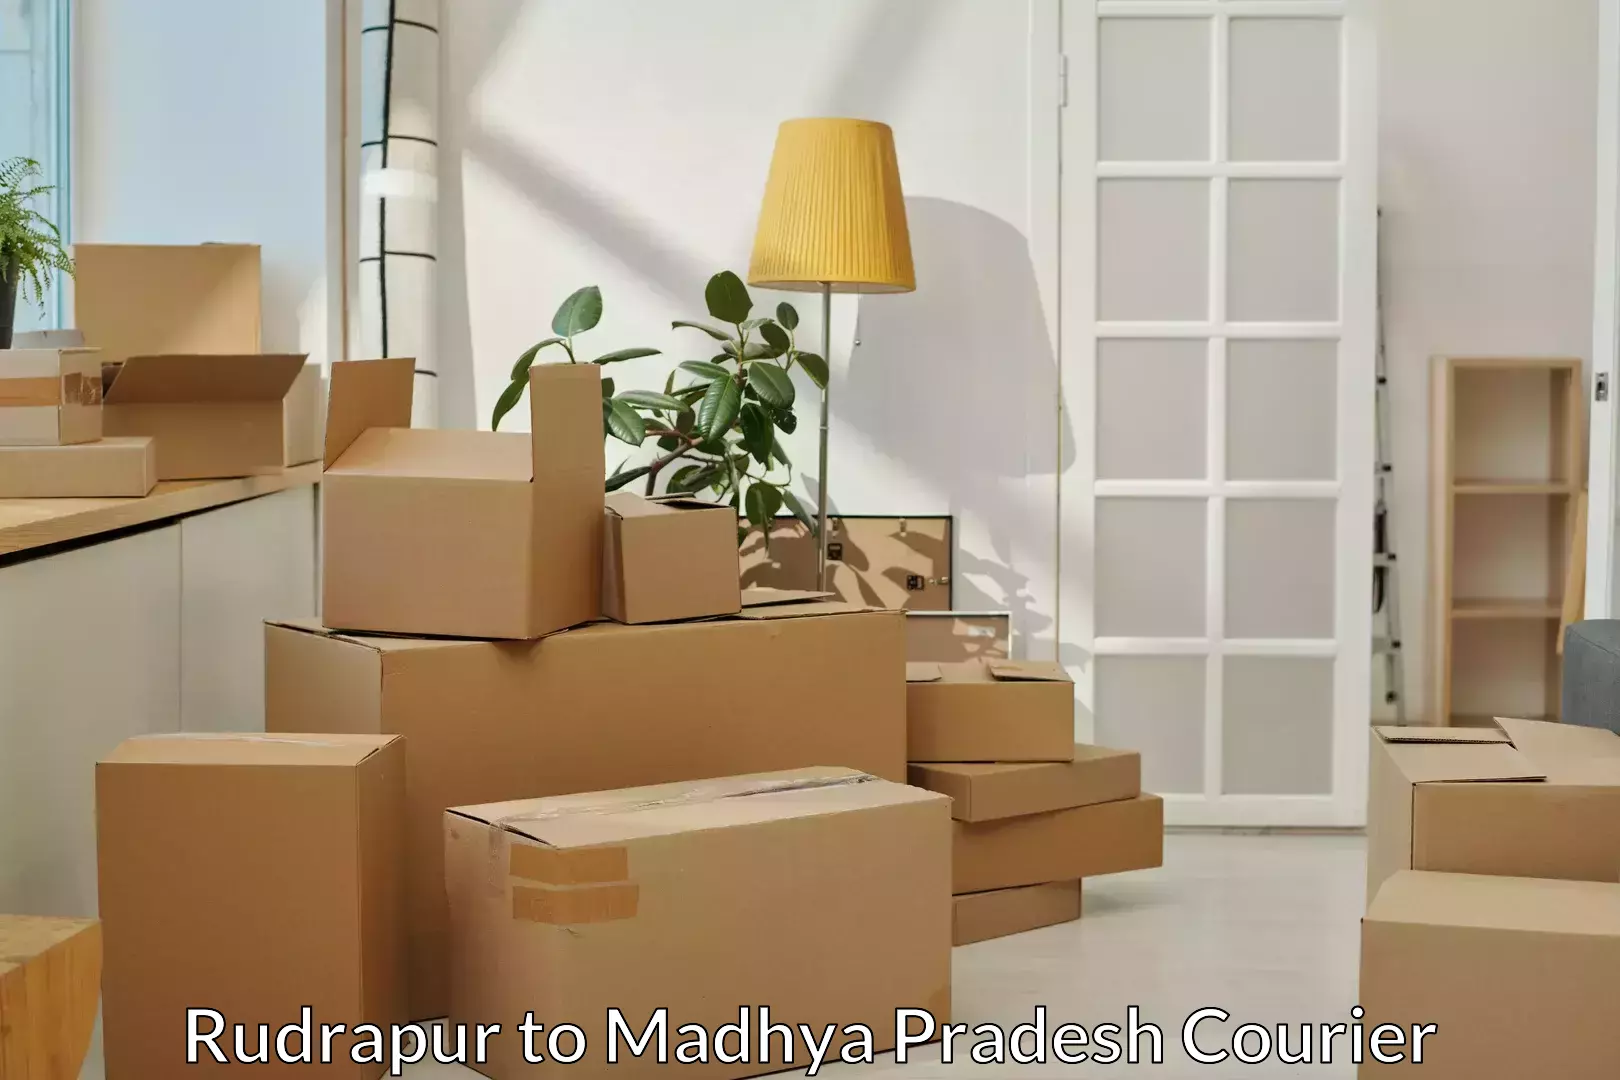 Furniture transport company Rudrapur to Indore